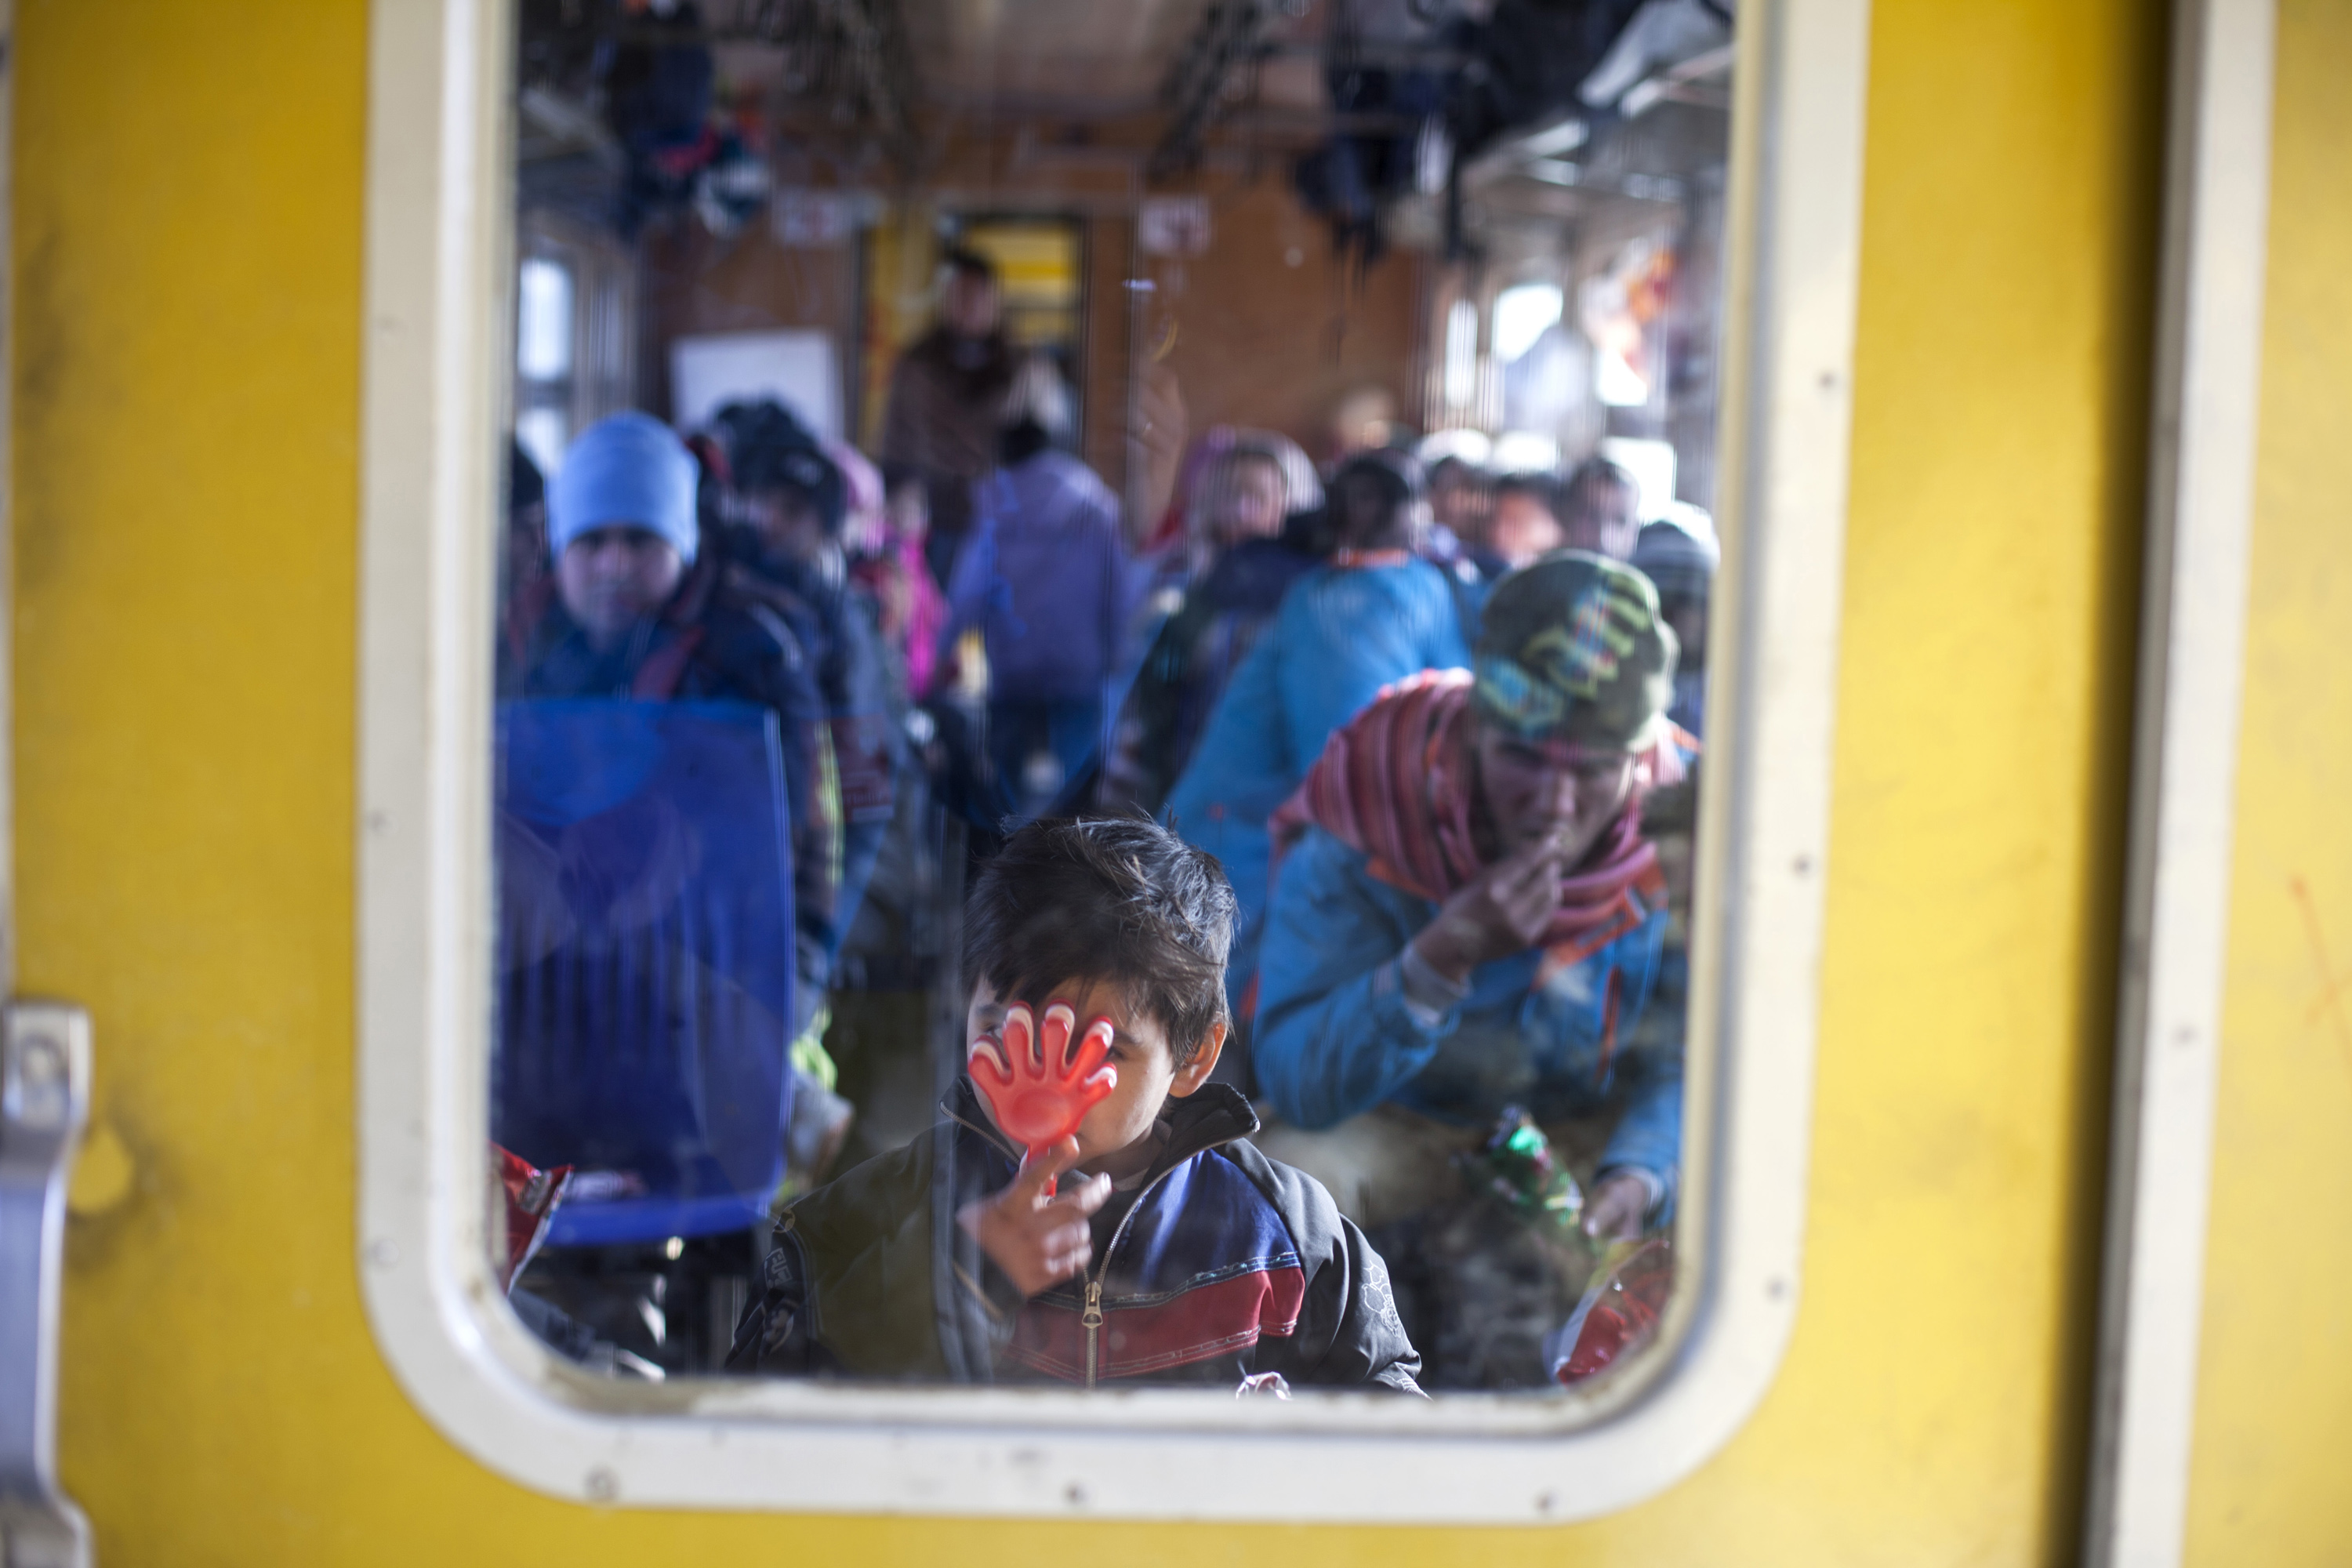 A boy playing with a hand toy together with his family aboard a train heading towards Belgrade taking refugees to a next point on their long journey away from home. 23.01.2016 Presevo, Serbia